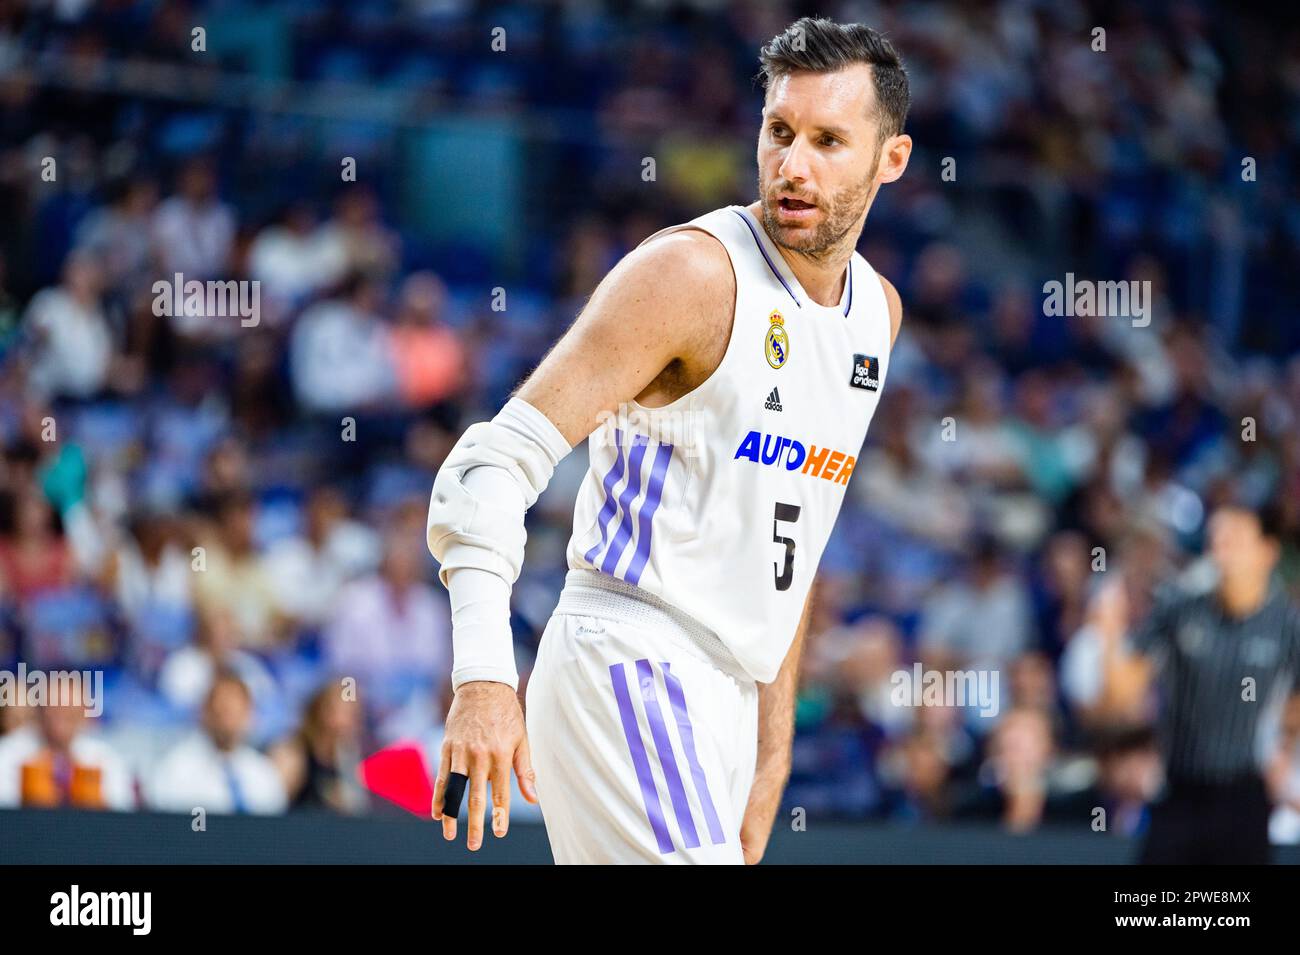 Madrid, Spain. 30th Apr, 2023. Rudy Fernandez (Real Madrid) during the  basketball match between Real Madrid and Zaragoza Basket valid for the  matchday 30 of the spanish basketball league ACB called “Liga